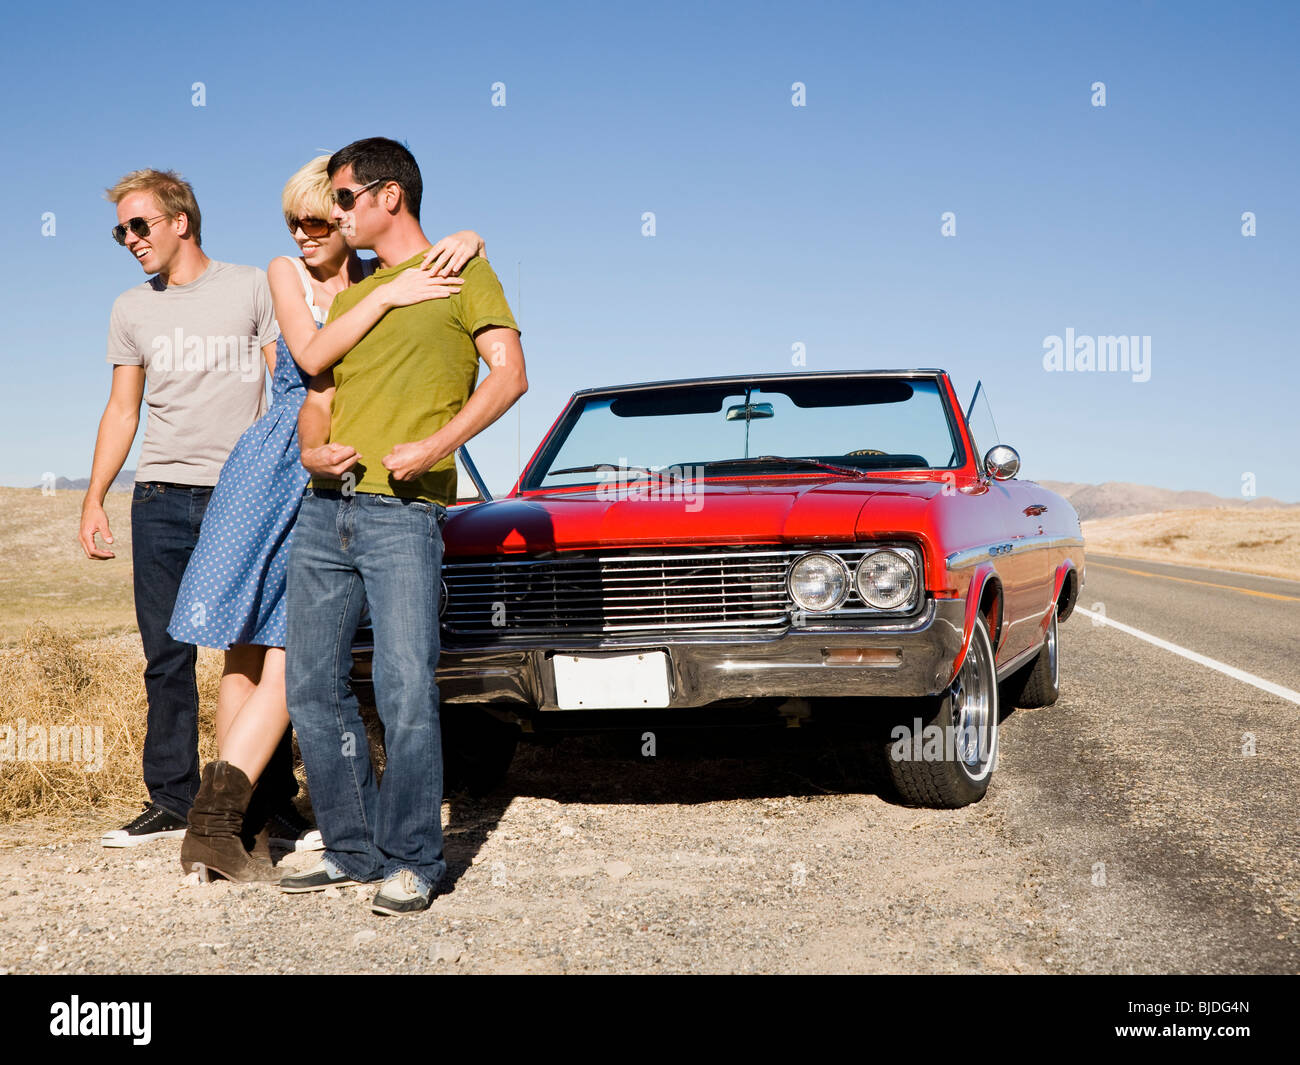 two men and a woman in front of a red convertible. Stock Photo